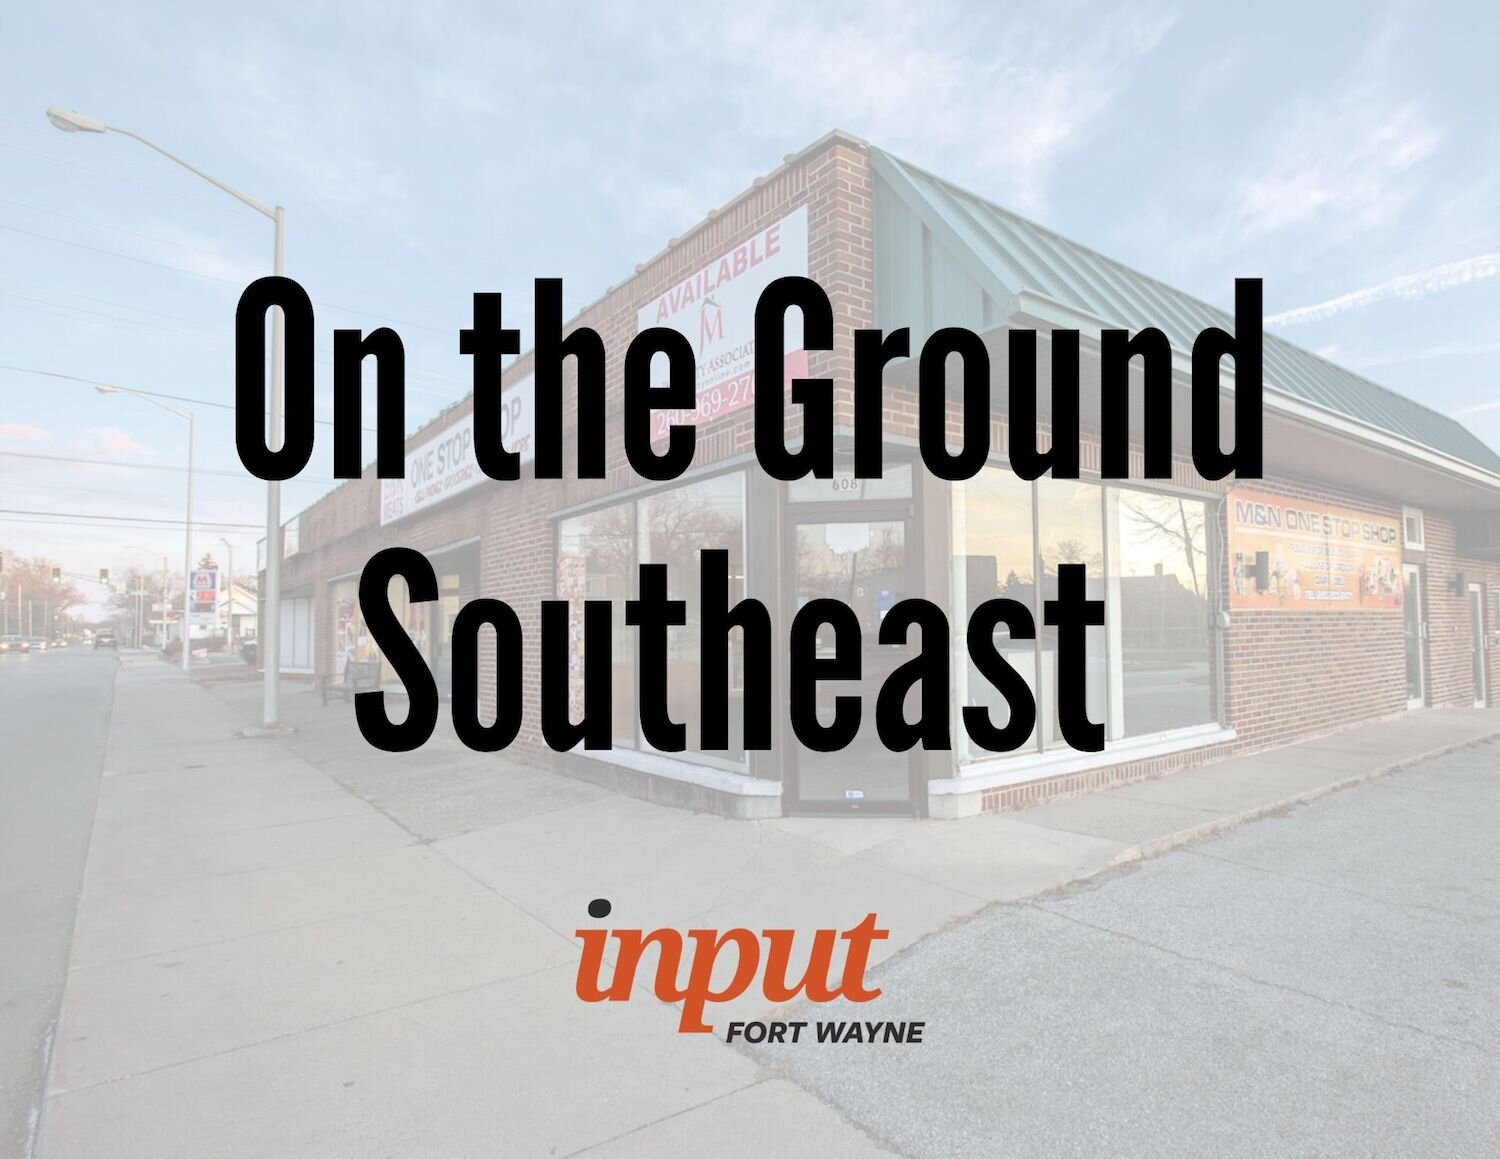 On the Ground Southeast is a new embedded journalism program Input Fort Wayne is launching in partnership with the St. Joseph Community Health Foundation, Parkview Health, NIPSCO, and Bridge of Grace Compassionate Ministries Center.